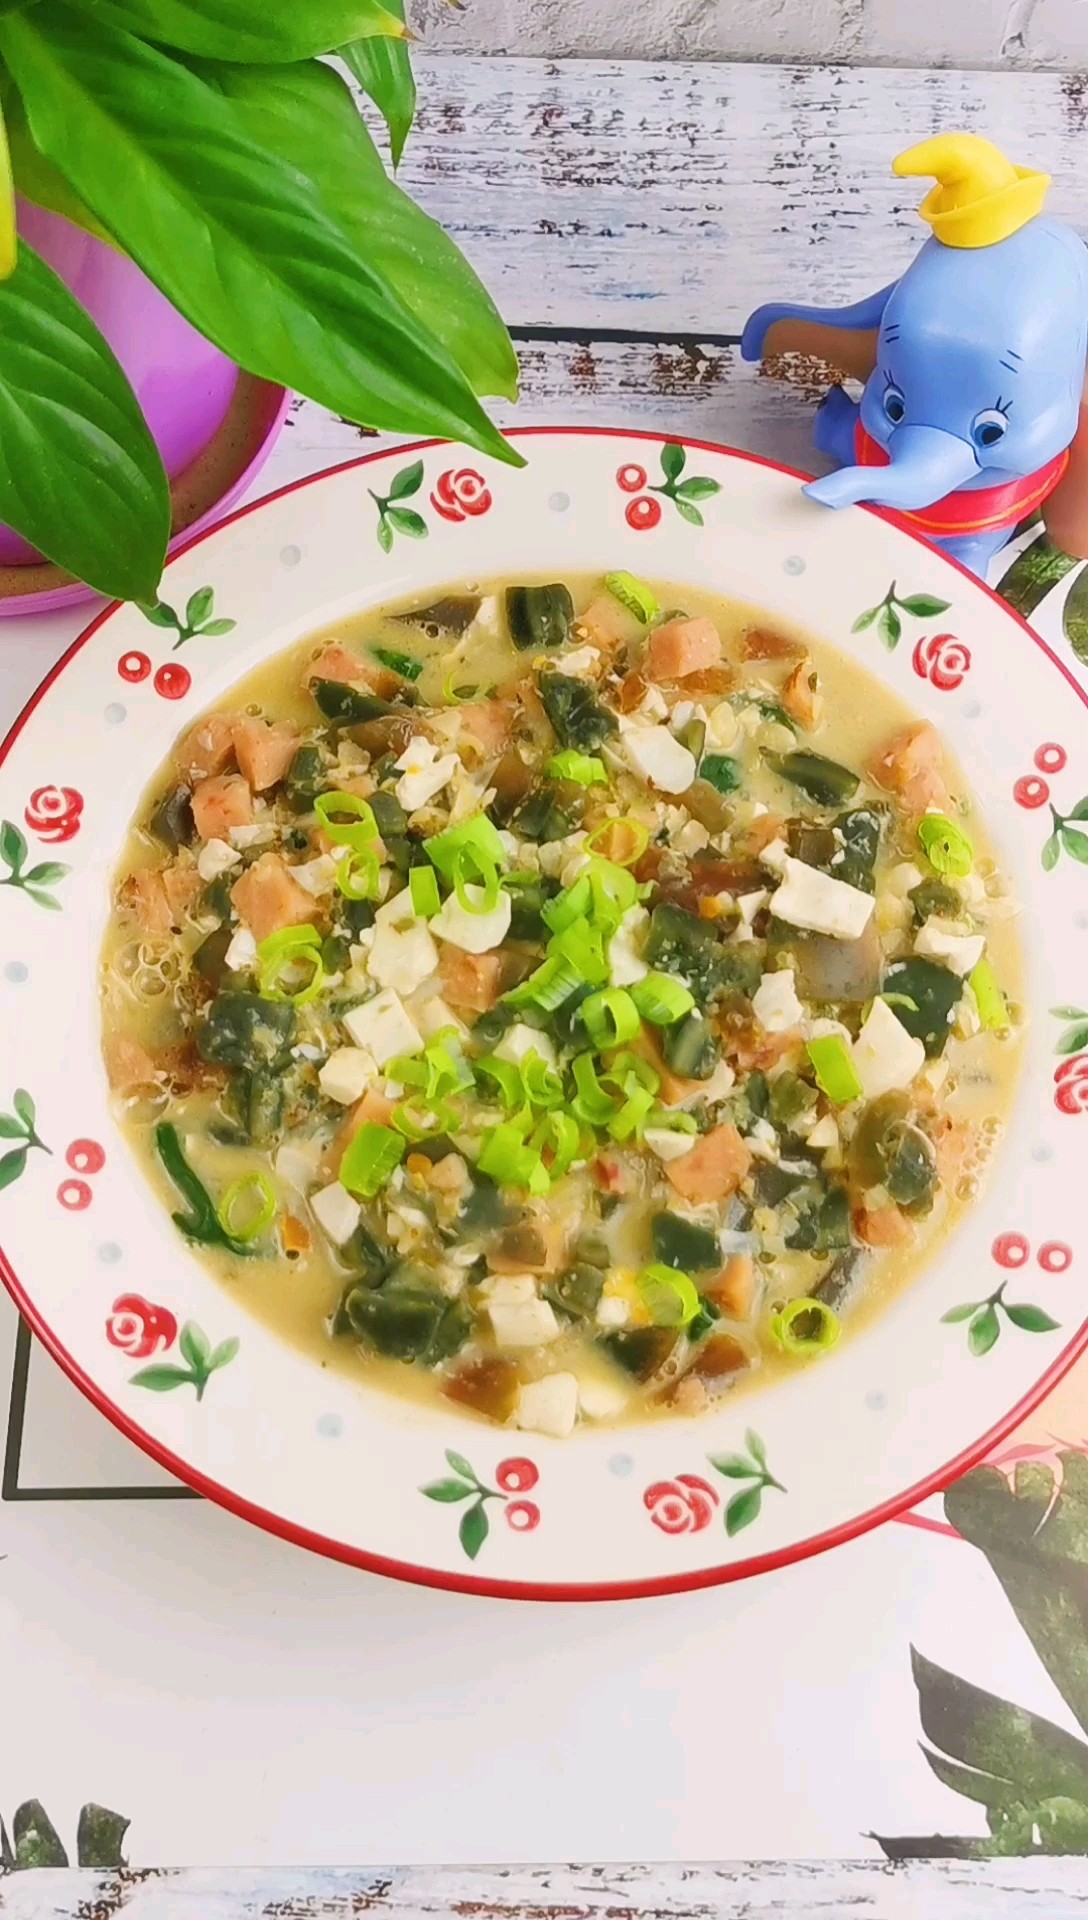 Spinach in Soup